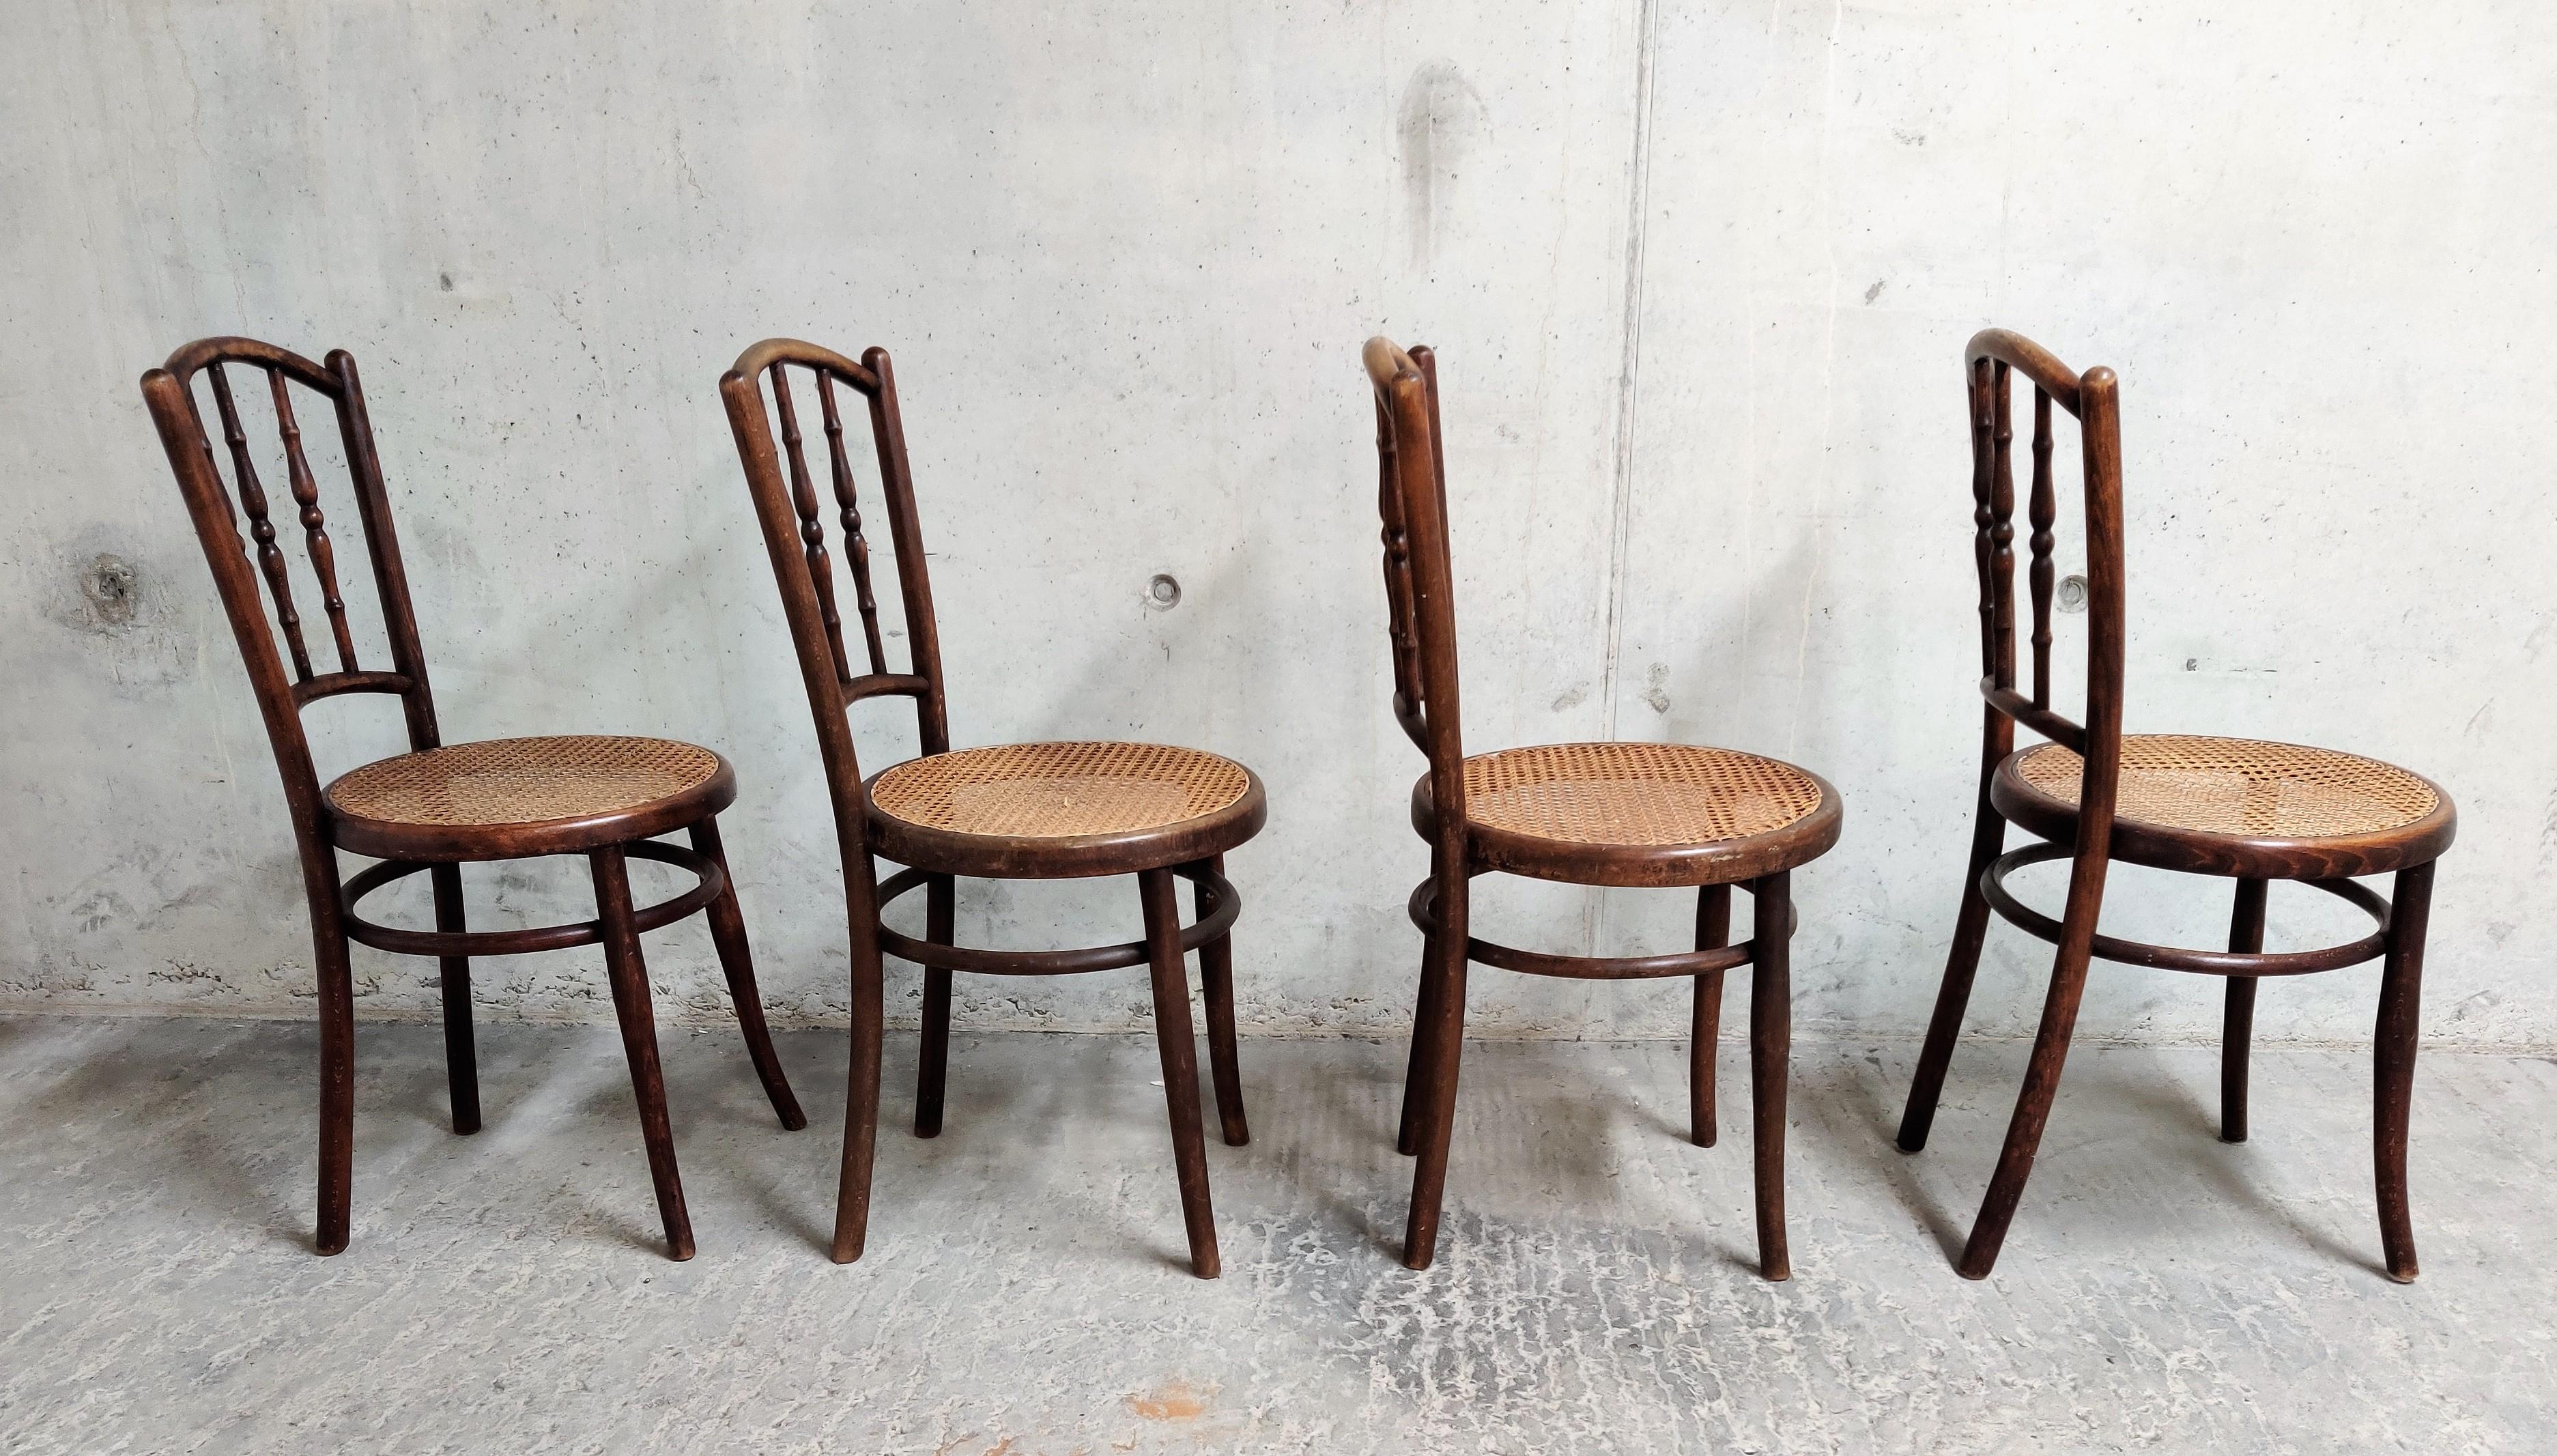 Set of 4 unique bentwooden dining chairs. 

This chairs were made in the 1920s by Jacob U. Josef Kohn.

As you can see in the pictures, the chairs are very similar to the famous 'Thonet' chairs.

1920s, Austria

The chairs are marked at the